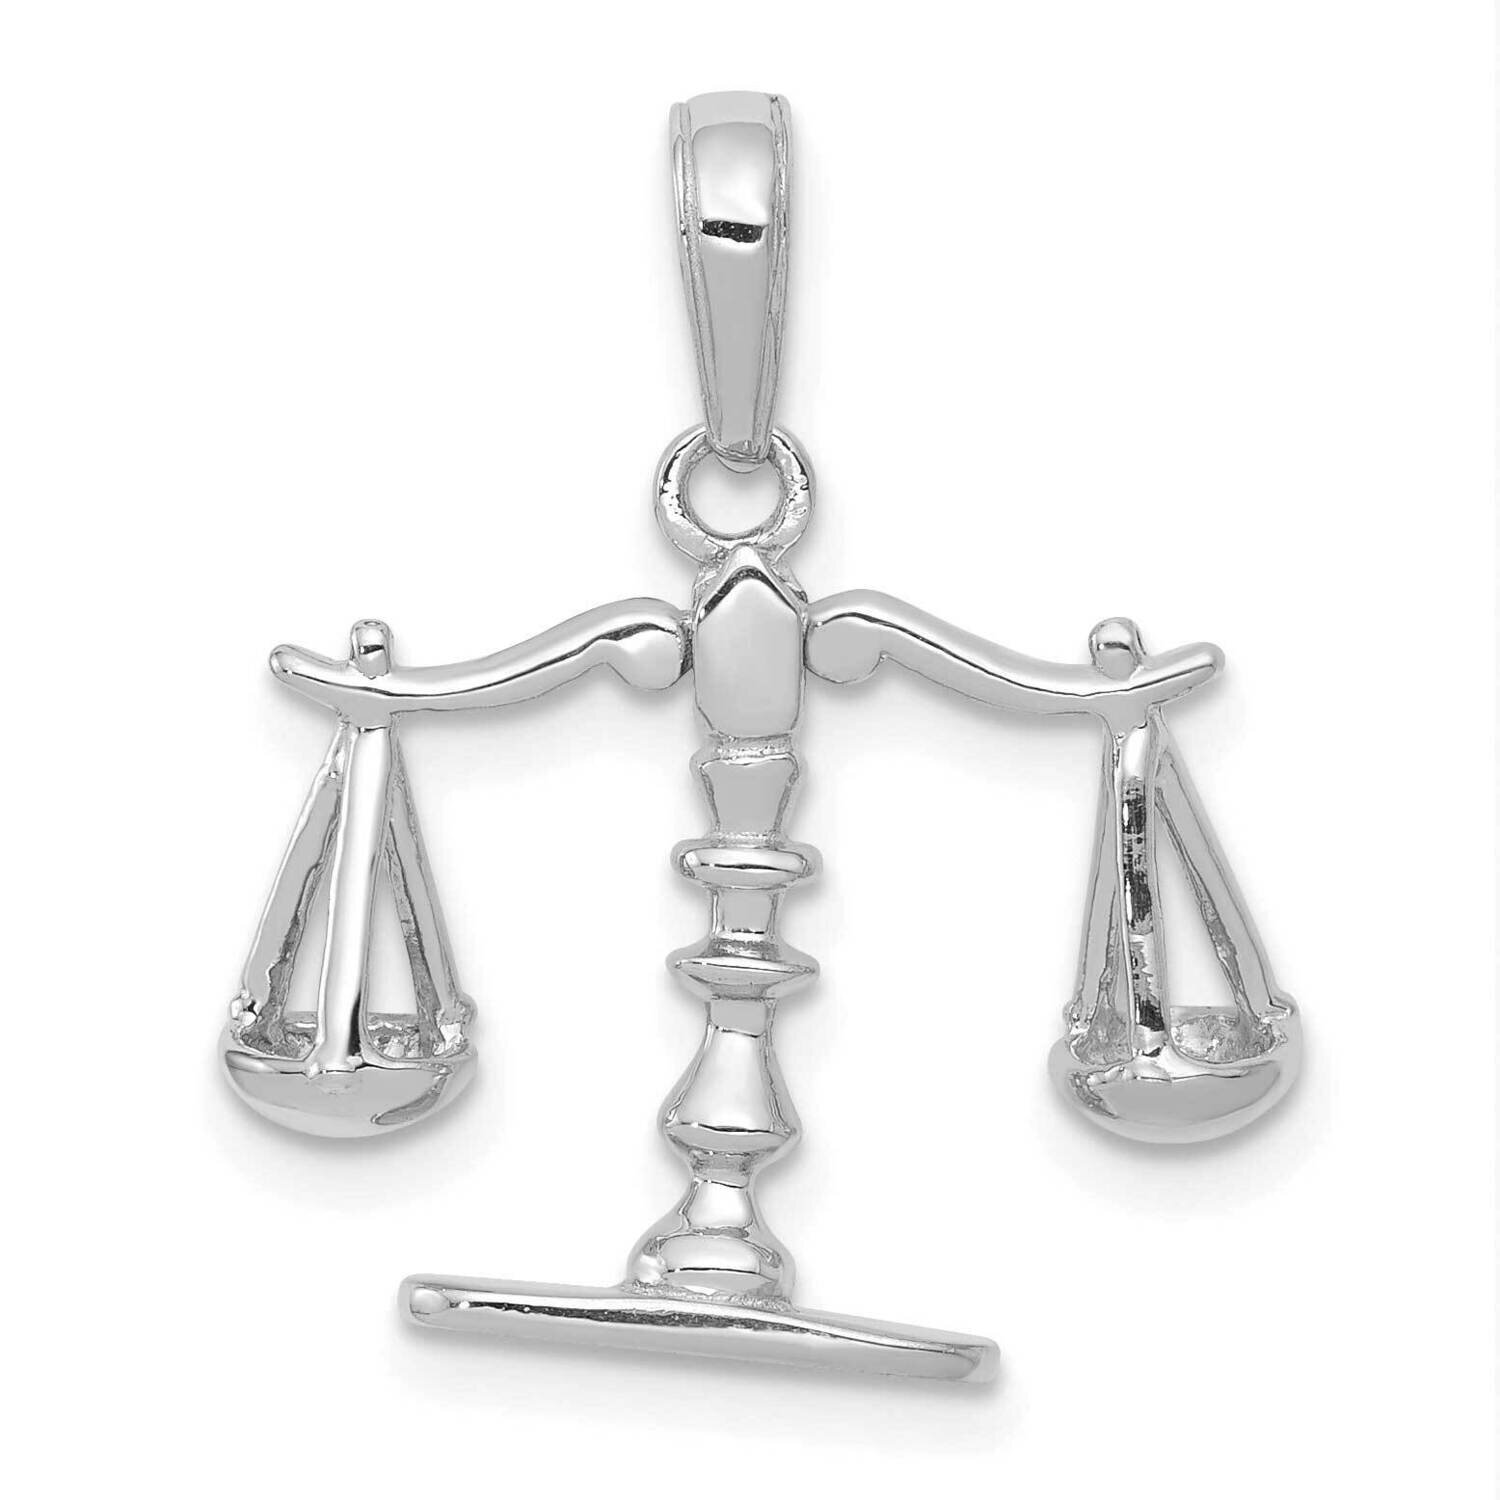 Moveable Scales of Justice Pendant 14k White Gold 3-D C3122W